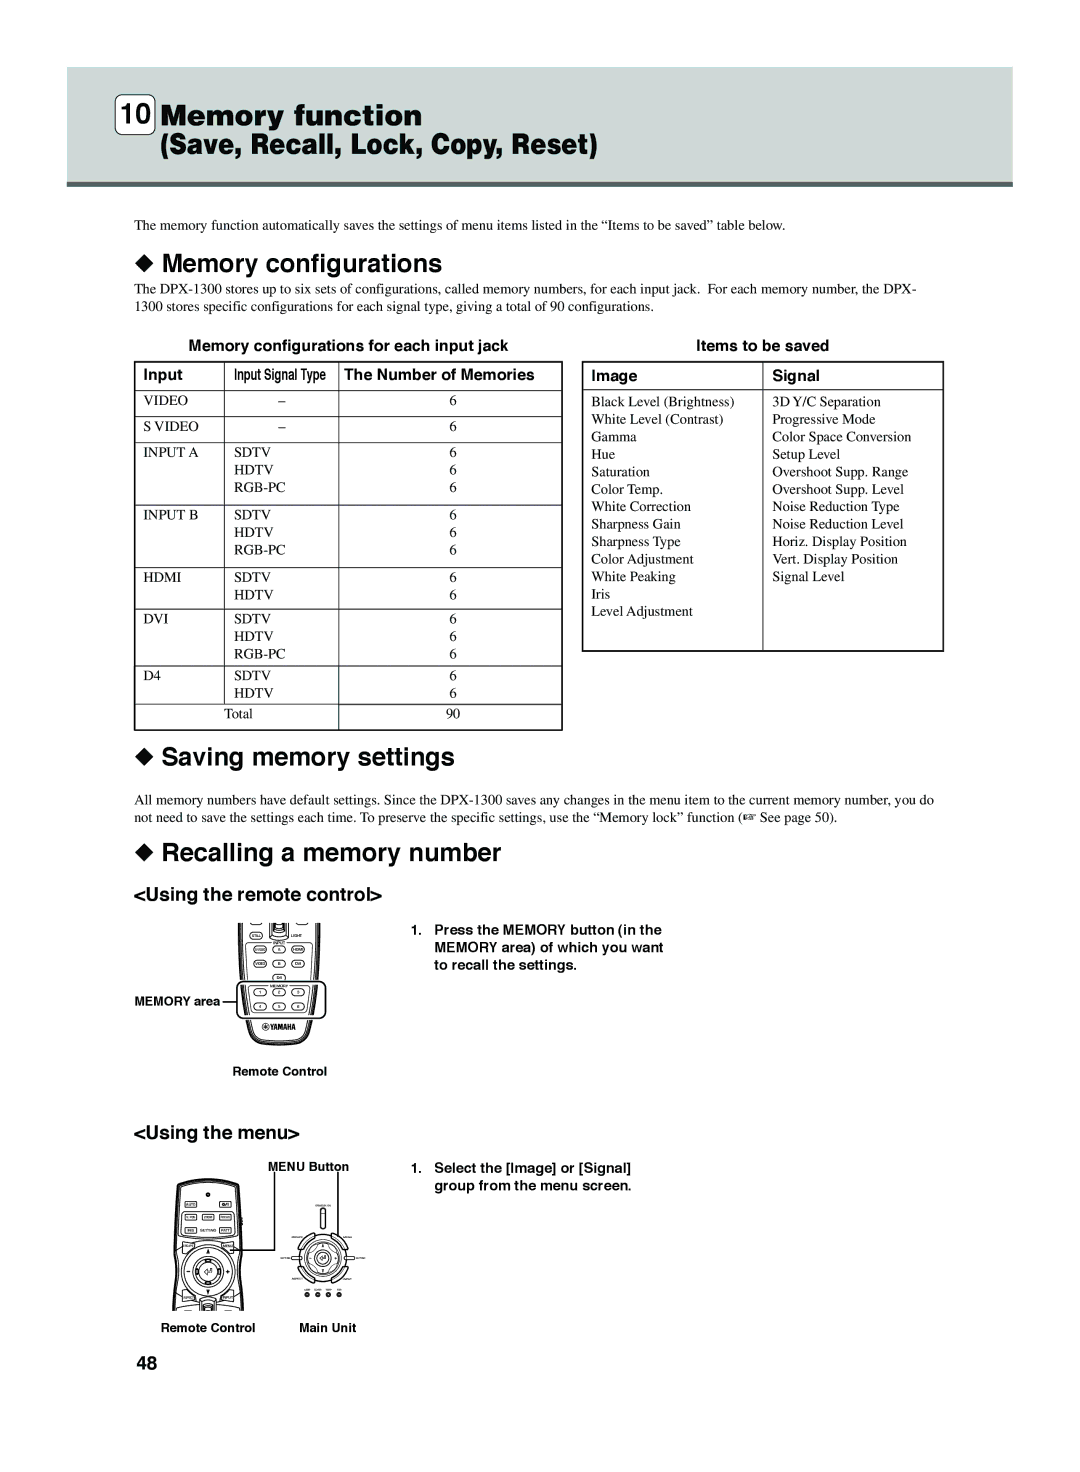 Yamaha DPX-1300 G manual Memory configurations, Saving memory settings, Recalling a memory number, Using the remote control 